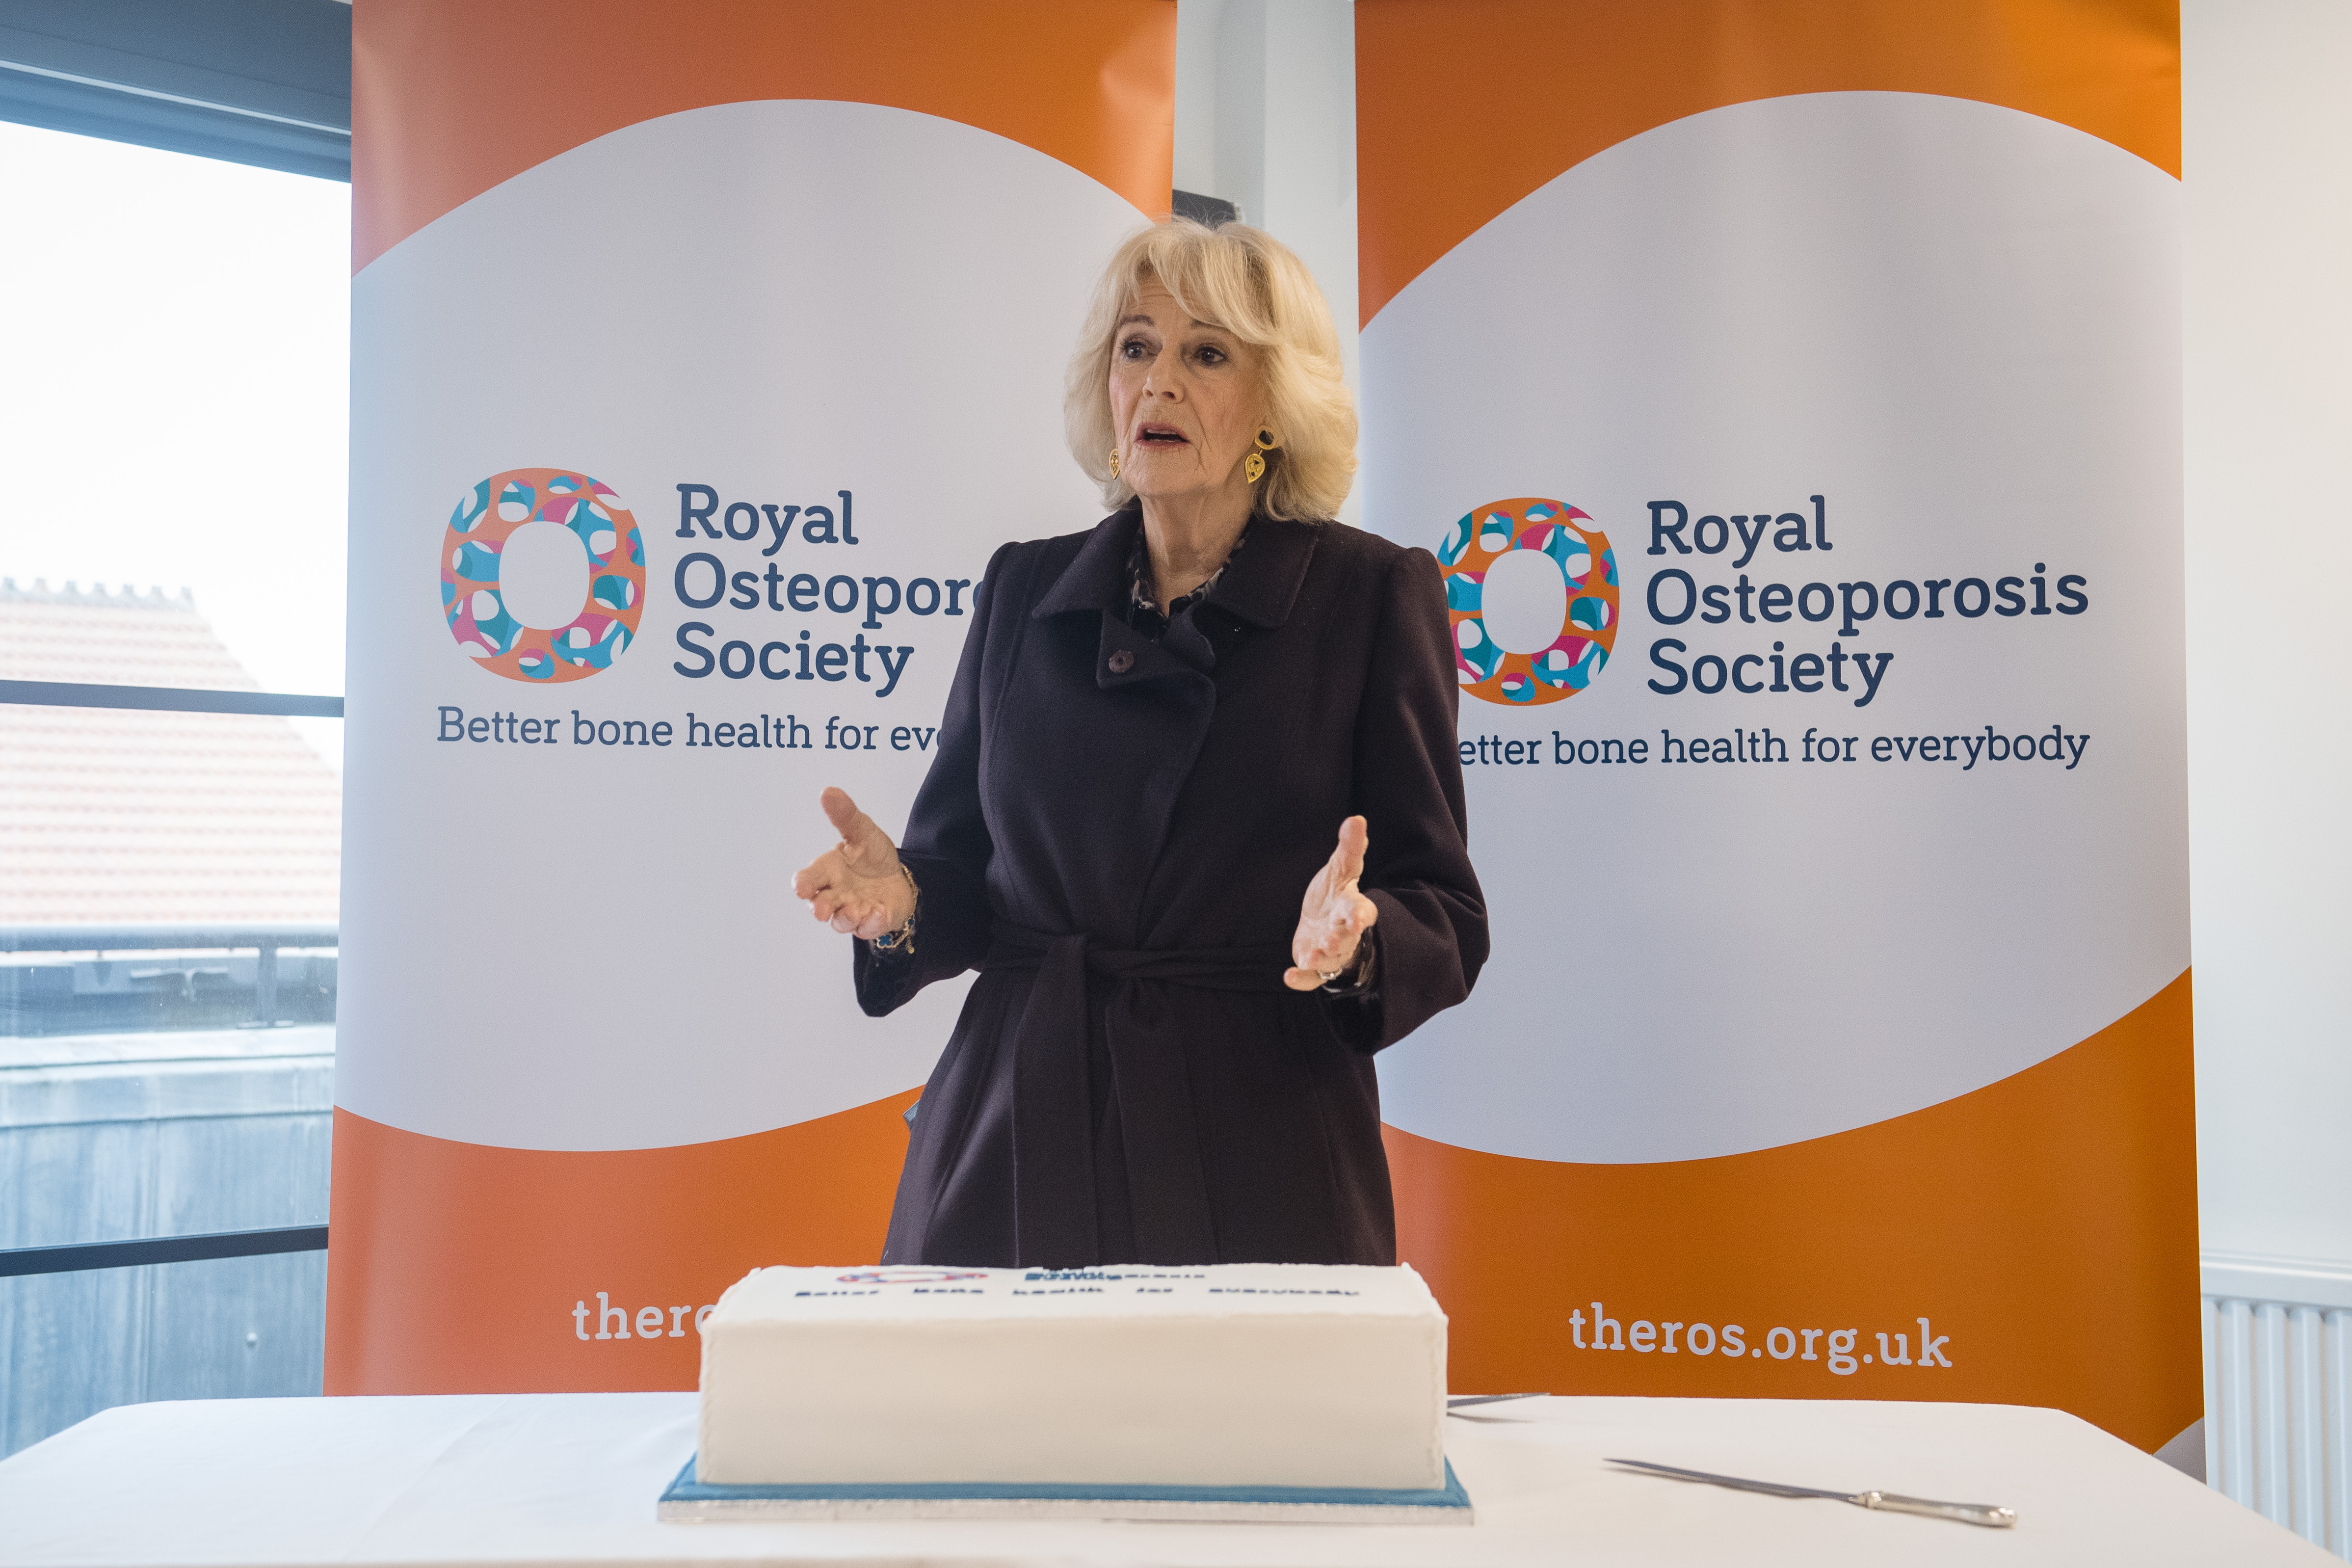 Queen Camilla gives a speech during the visit to the Royal Osteoporosis Society reception on January 25, 2023 in Bath, England | Source: Getty Images